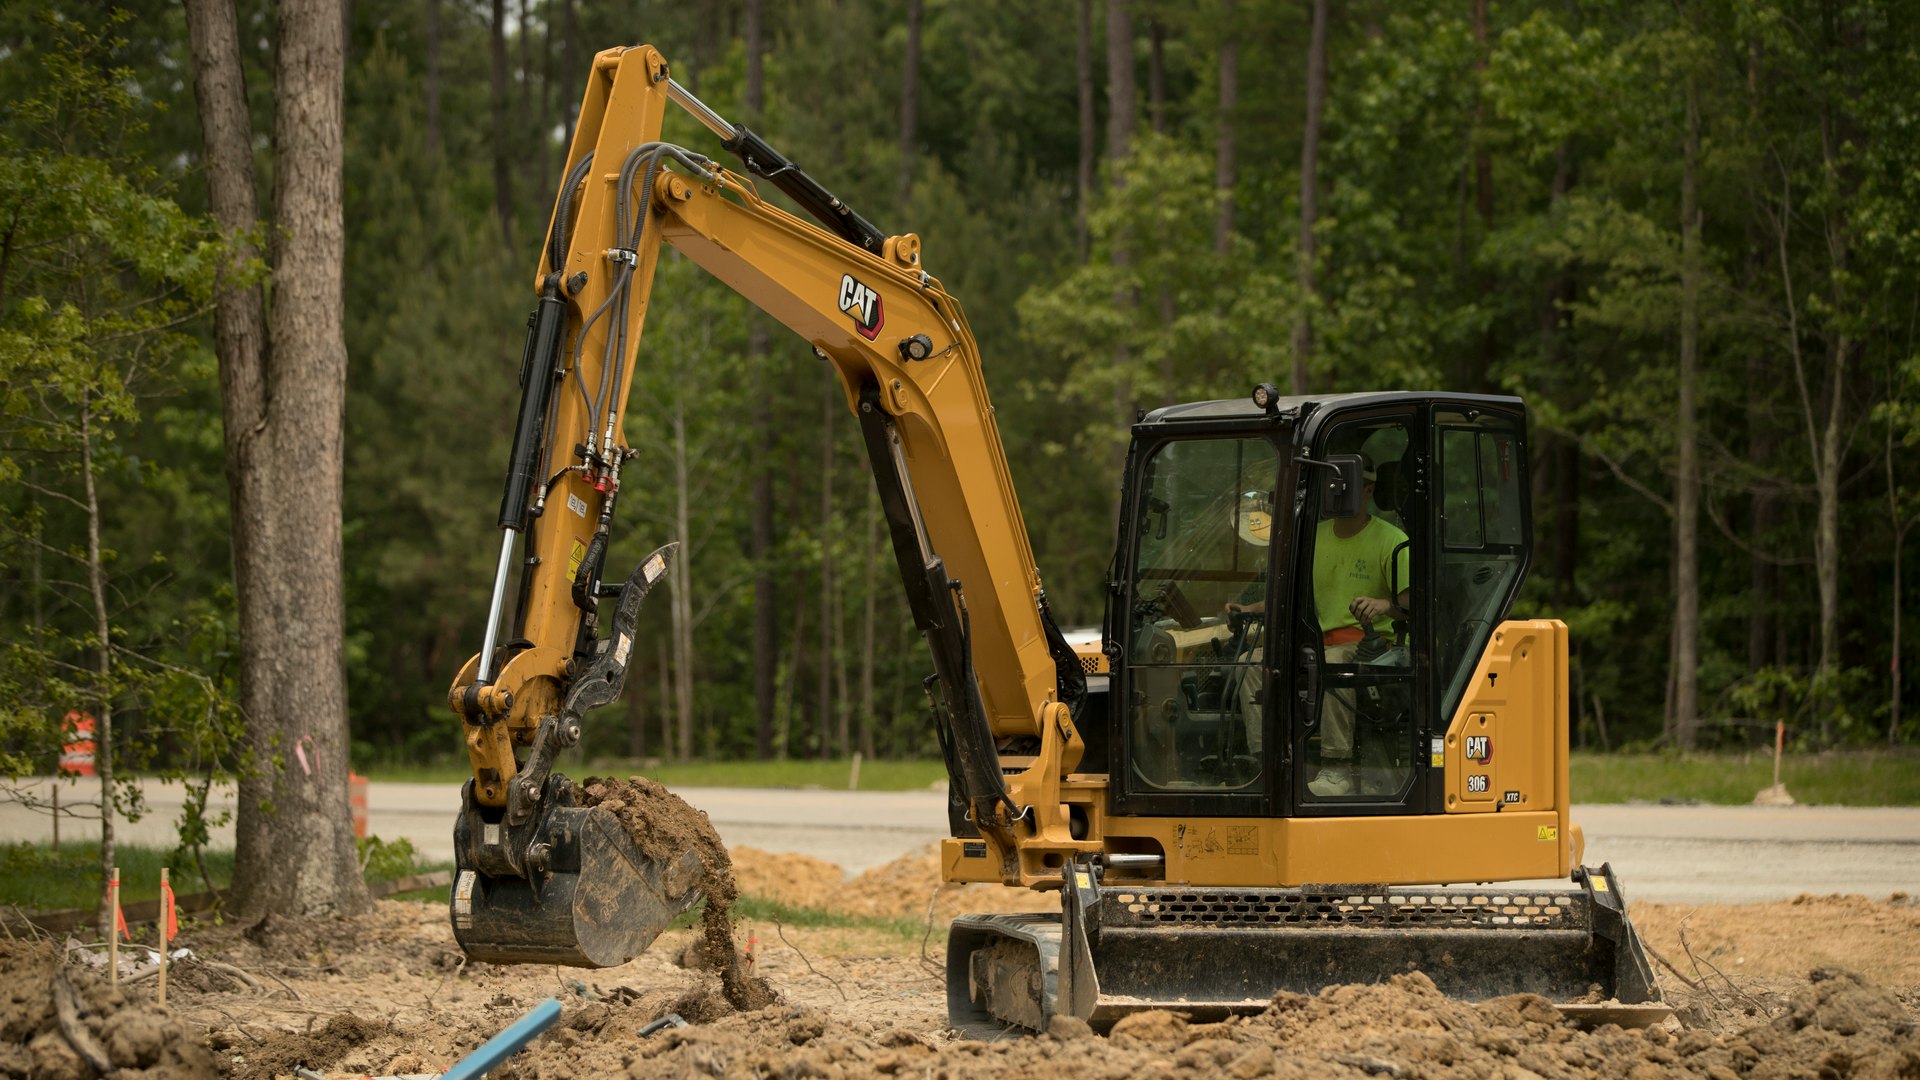 Caterpillar Enters 6-ton Class with 306 CR Next Generation Mini Excavator From: Caterpillar - | For Pros